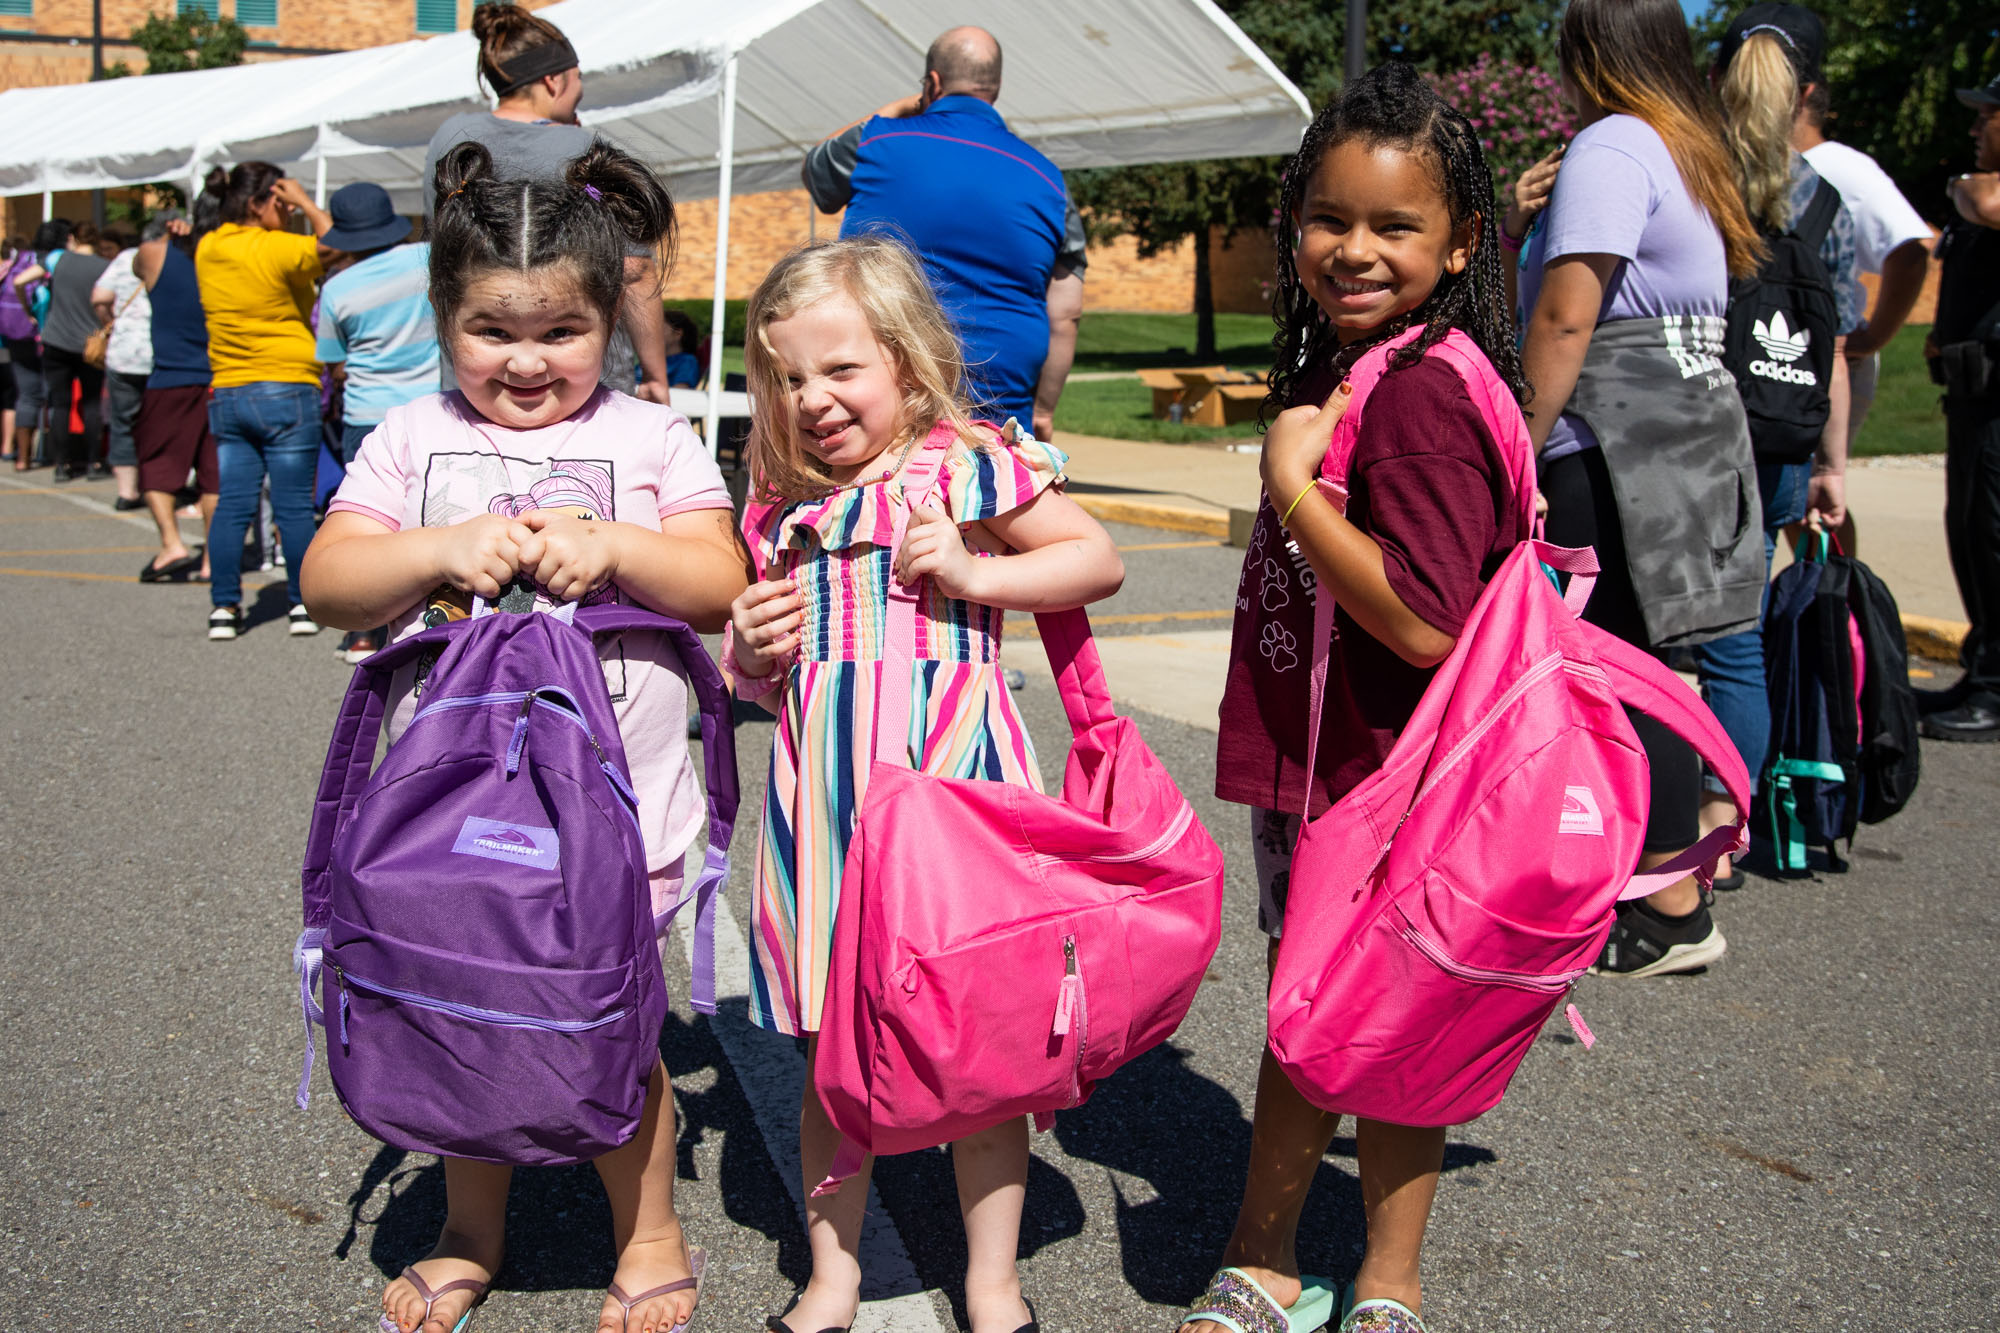 Three young girls holding up their pink bookbags. The girl on the left is holding a purple backpack.